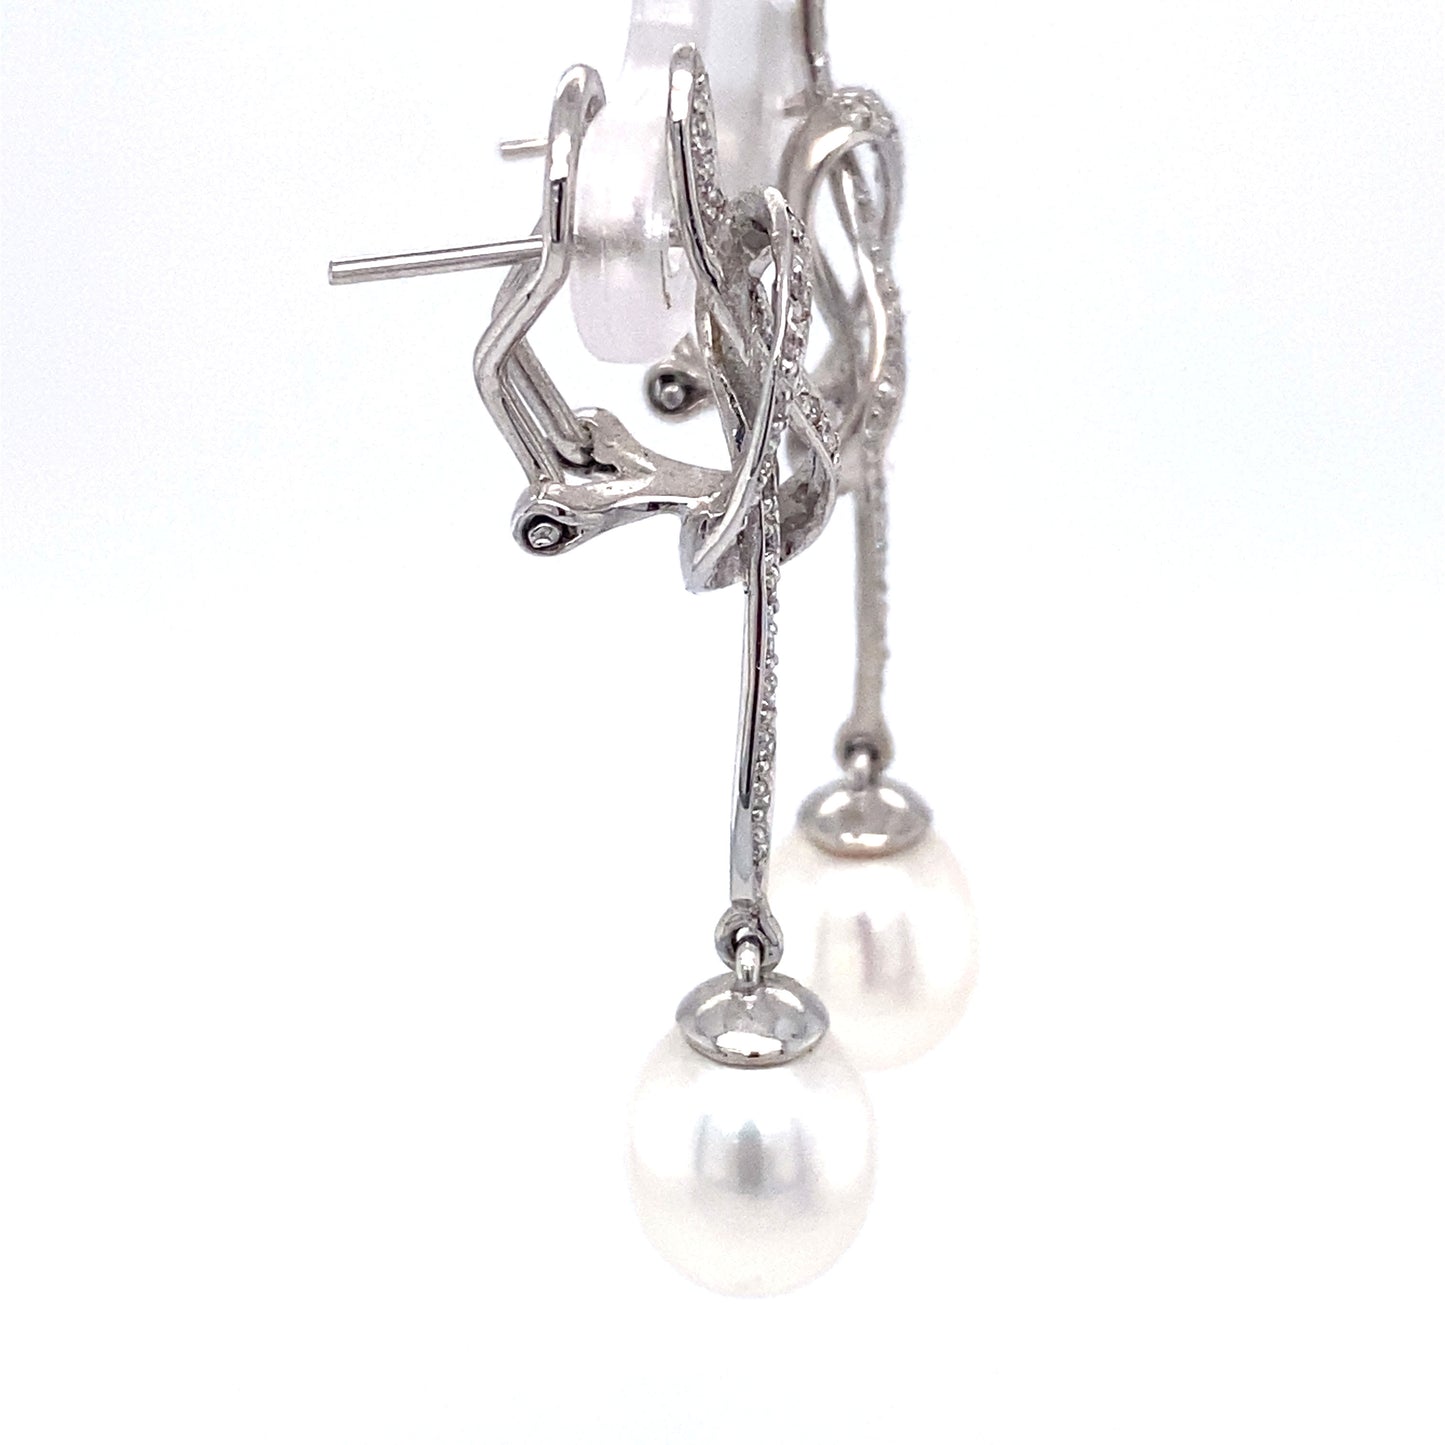 Circa 1980s 0.75 Carat Diamond and Pearl Knot Dangle Earrings in 18K White Gold